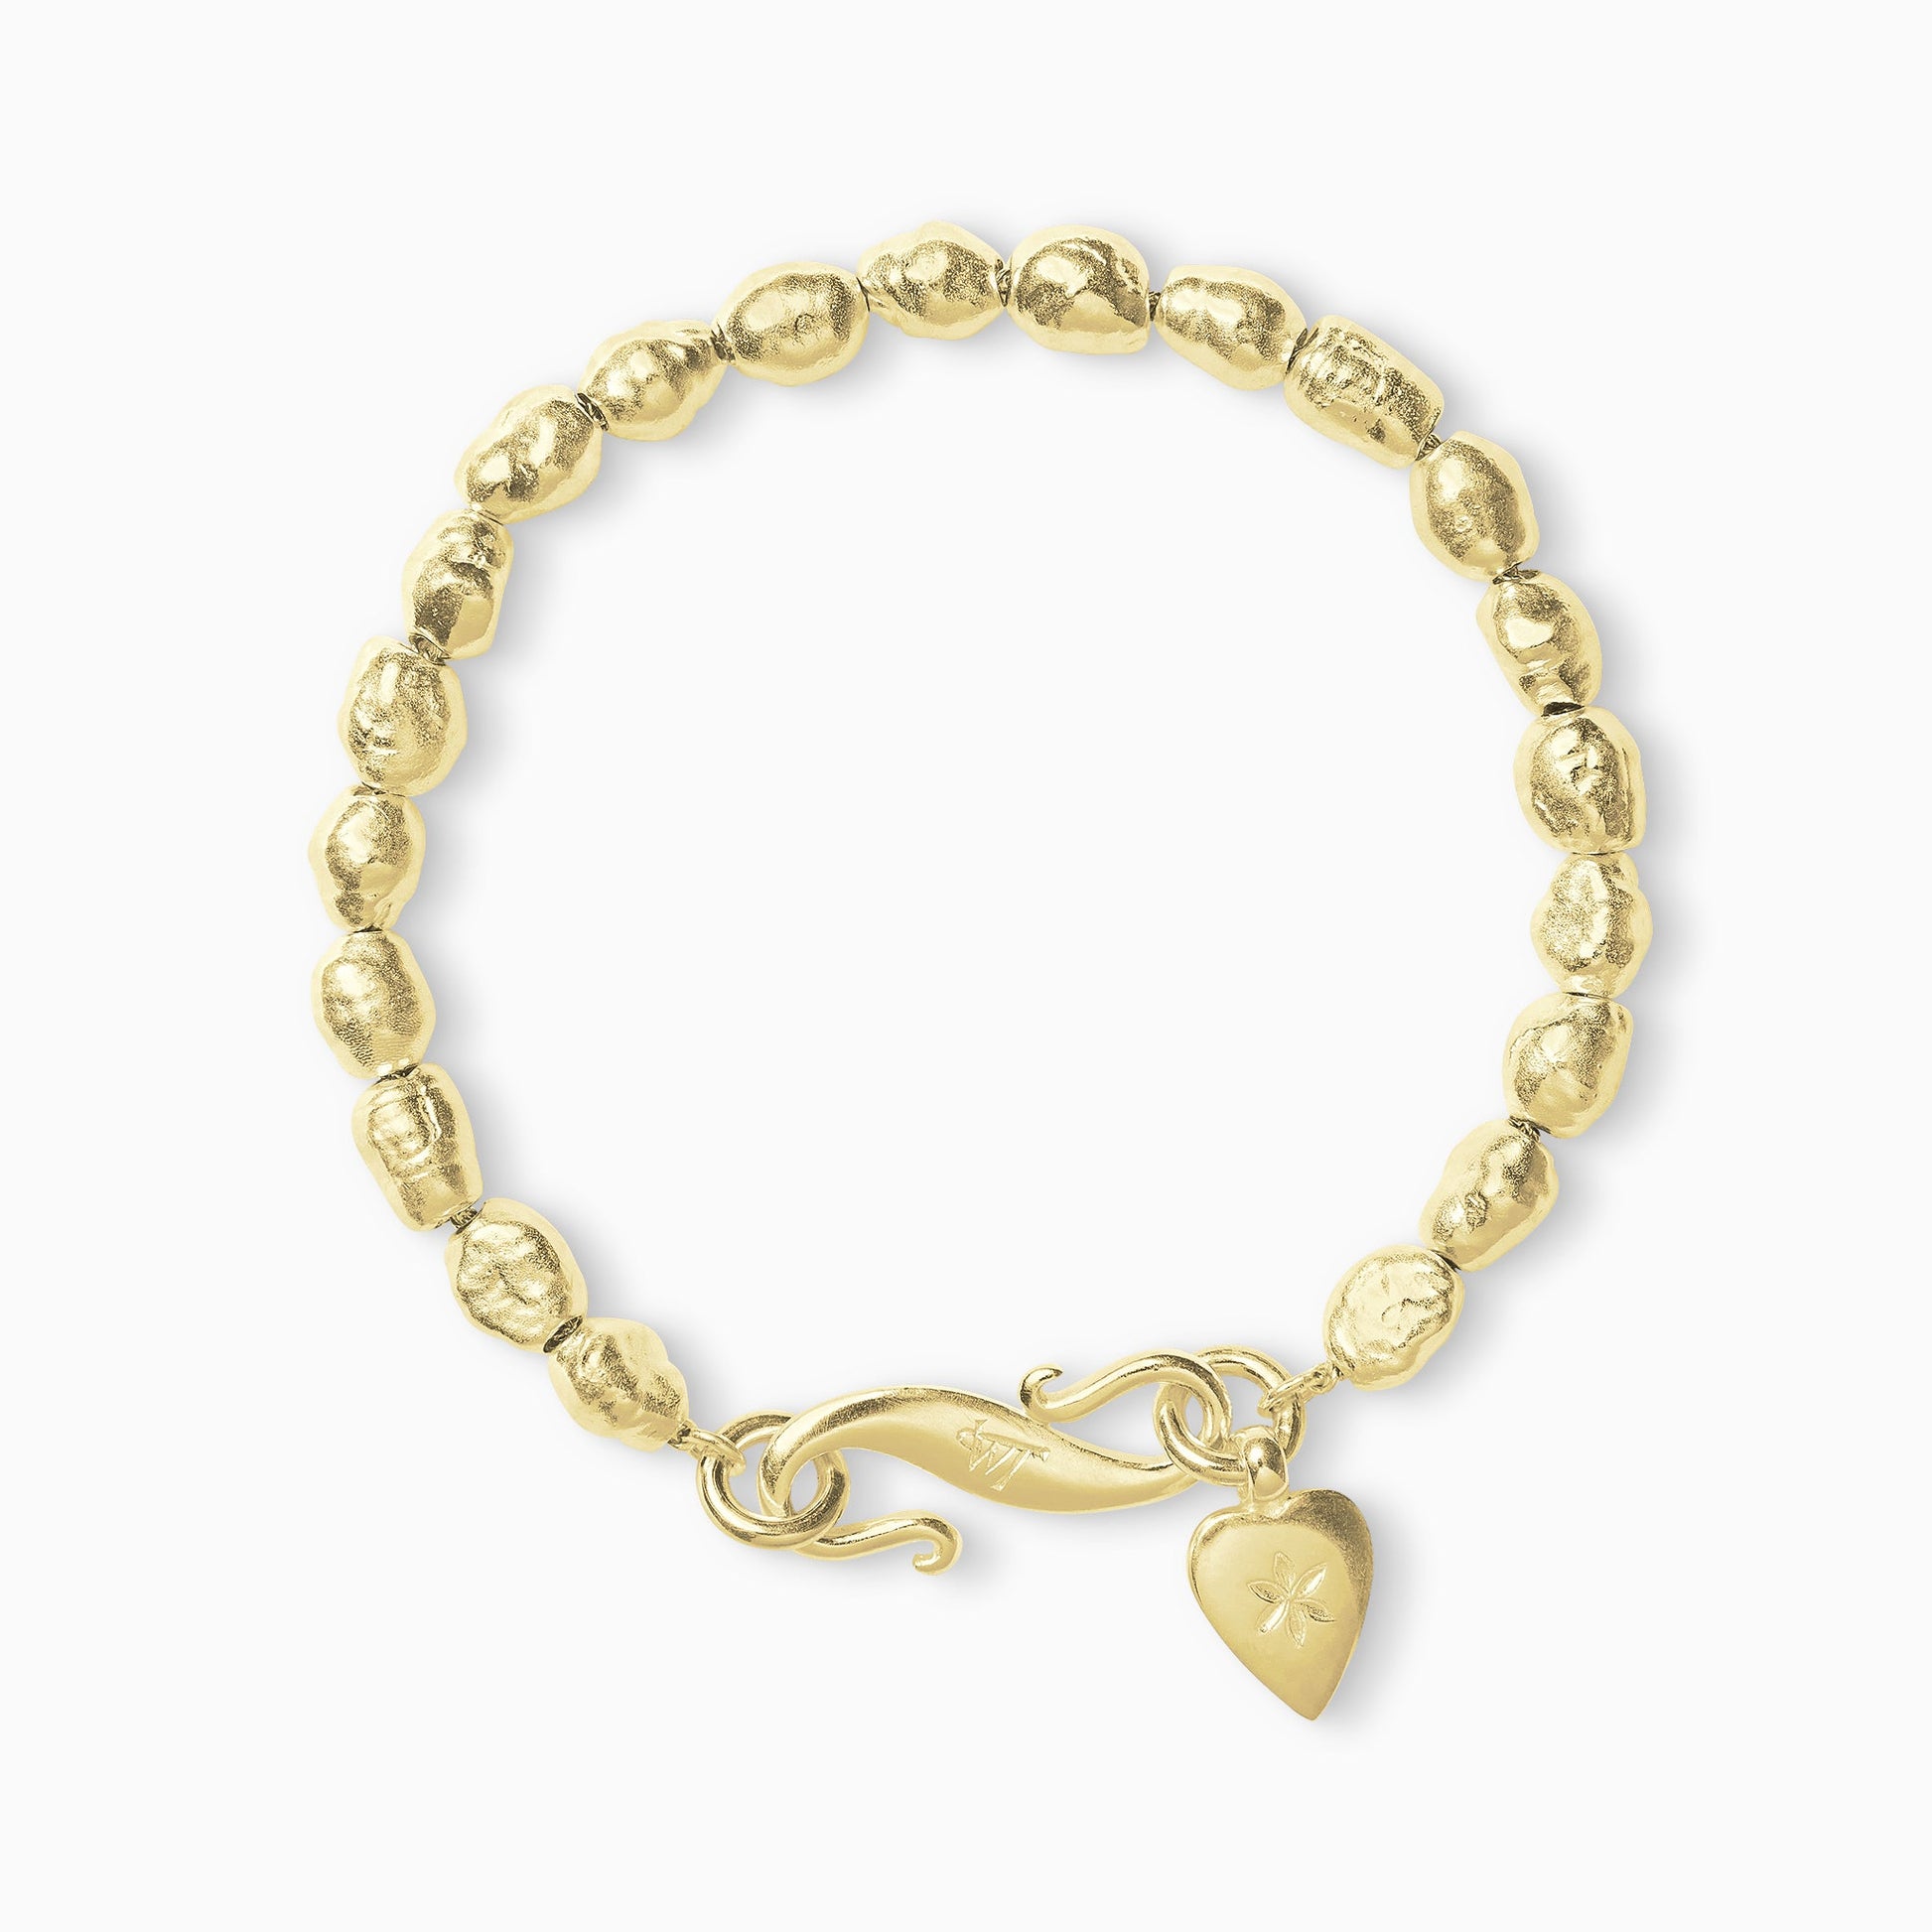 An 18ct Fairtrade yellow gold bracelet of handmade irregular pearl shaped textured beads with a smooth heart shaped charm engraved with a 6 petal flower and our signature ’S’ clasp. Bracelet length 190mm. Beads varying approximately 8mm x 6mm.